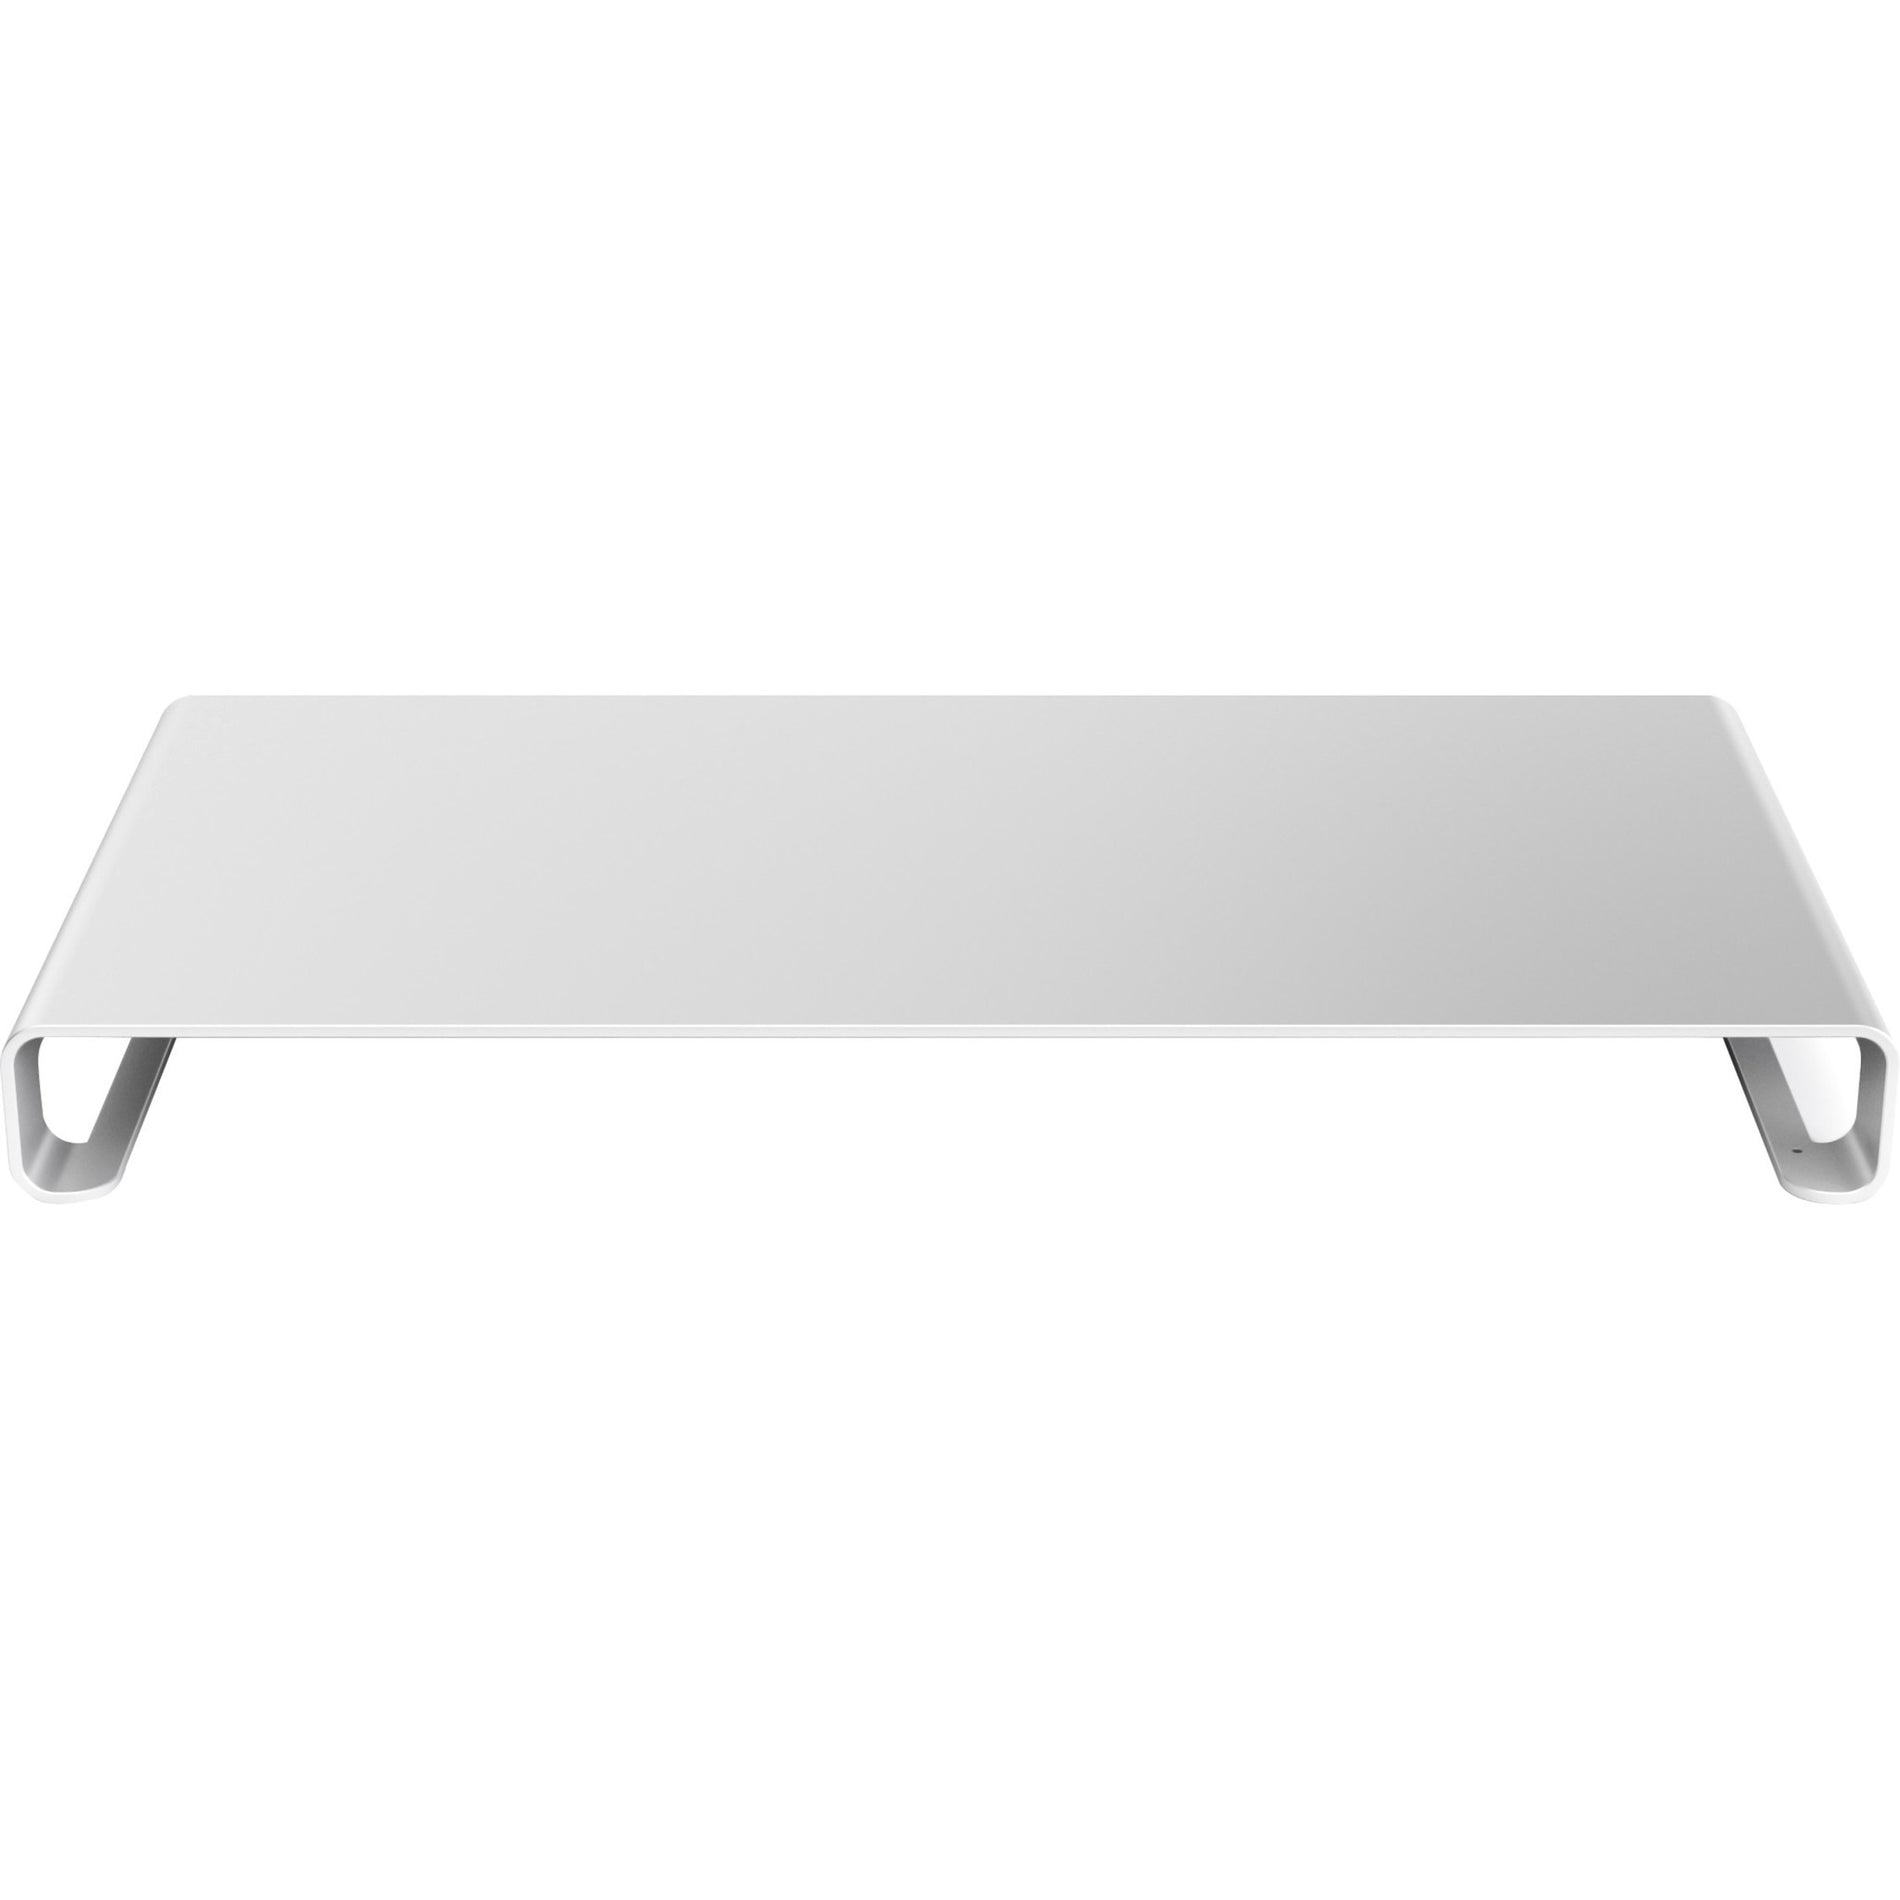 Satechi ST-ASMSS Aluminum Monitor Stand, Silver - Elevate Your Workspace with Style and Functionality